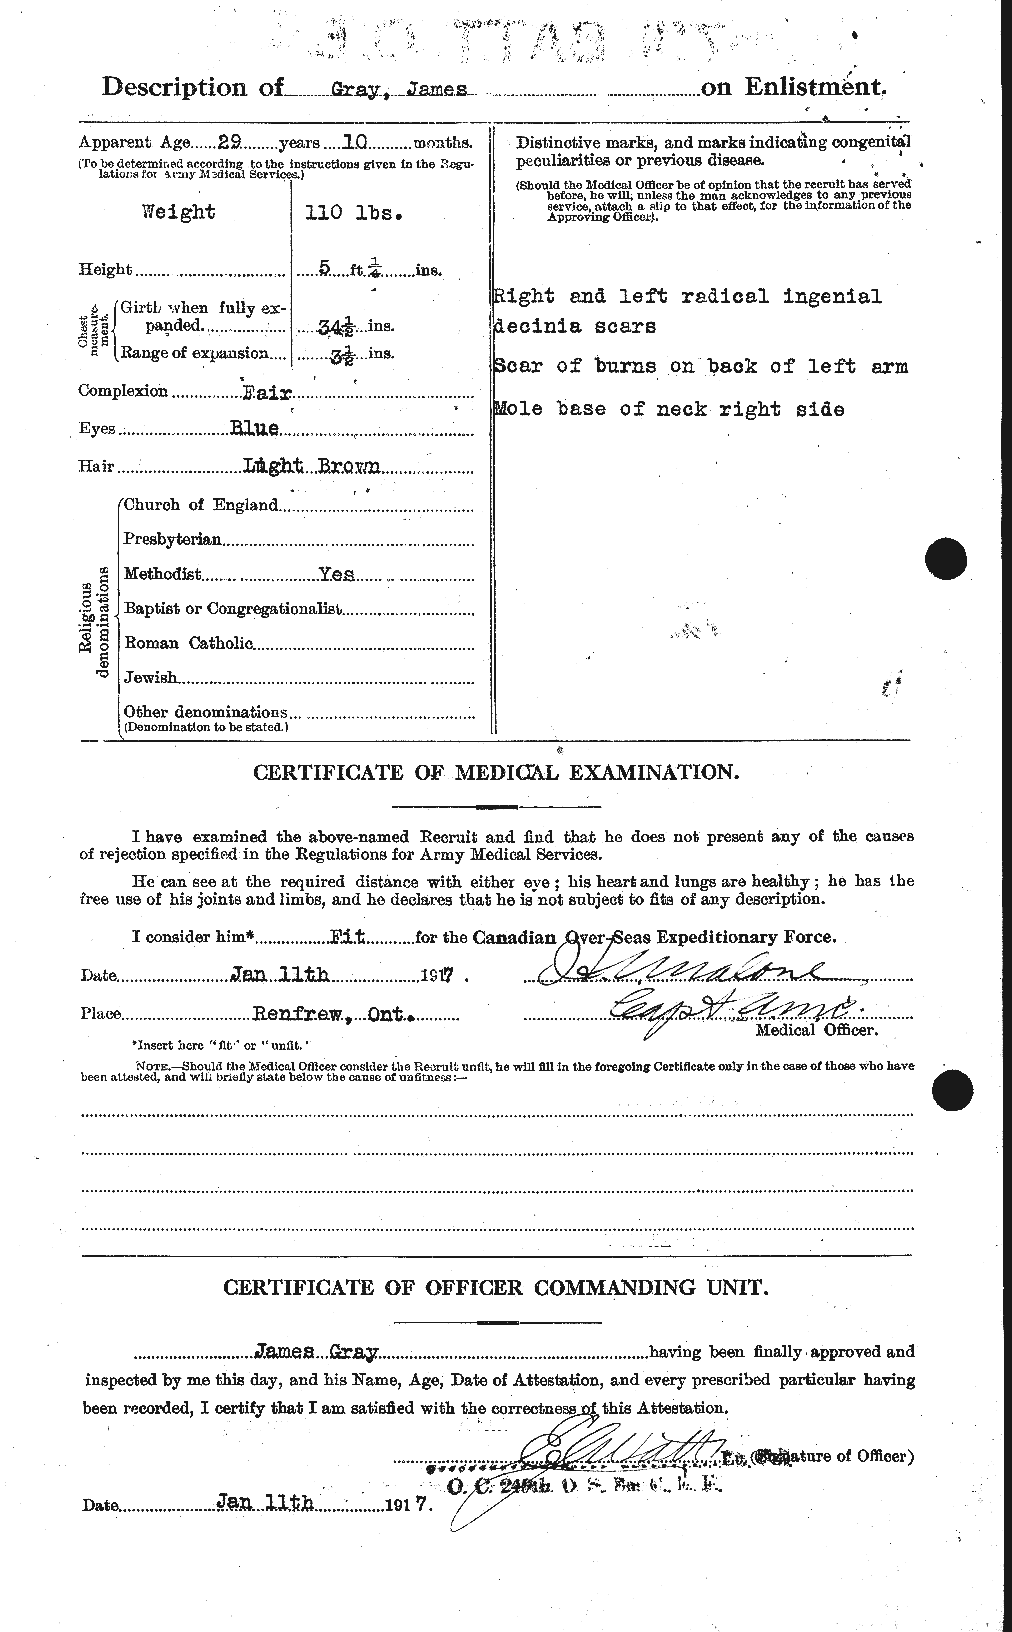 Personnel Records of the First World War - CEF 363280b